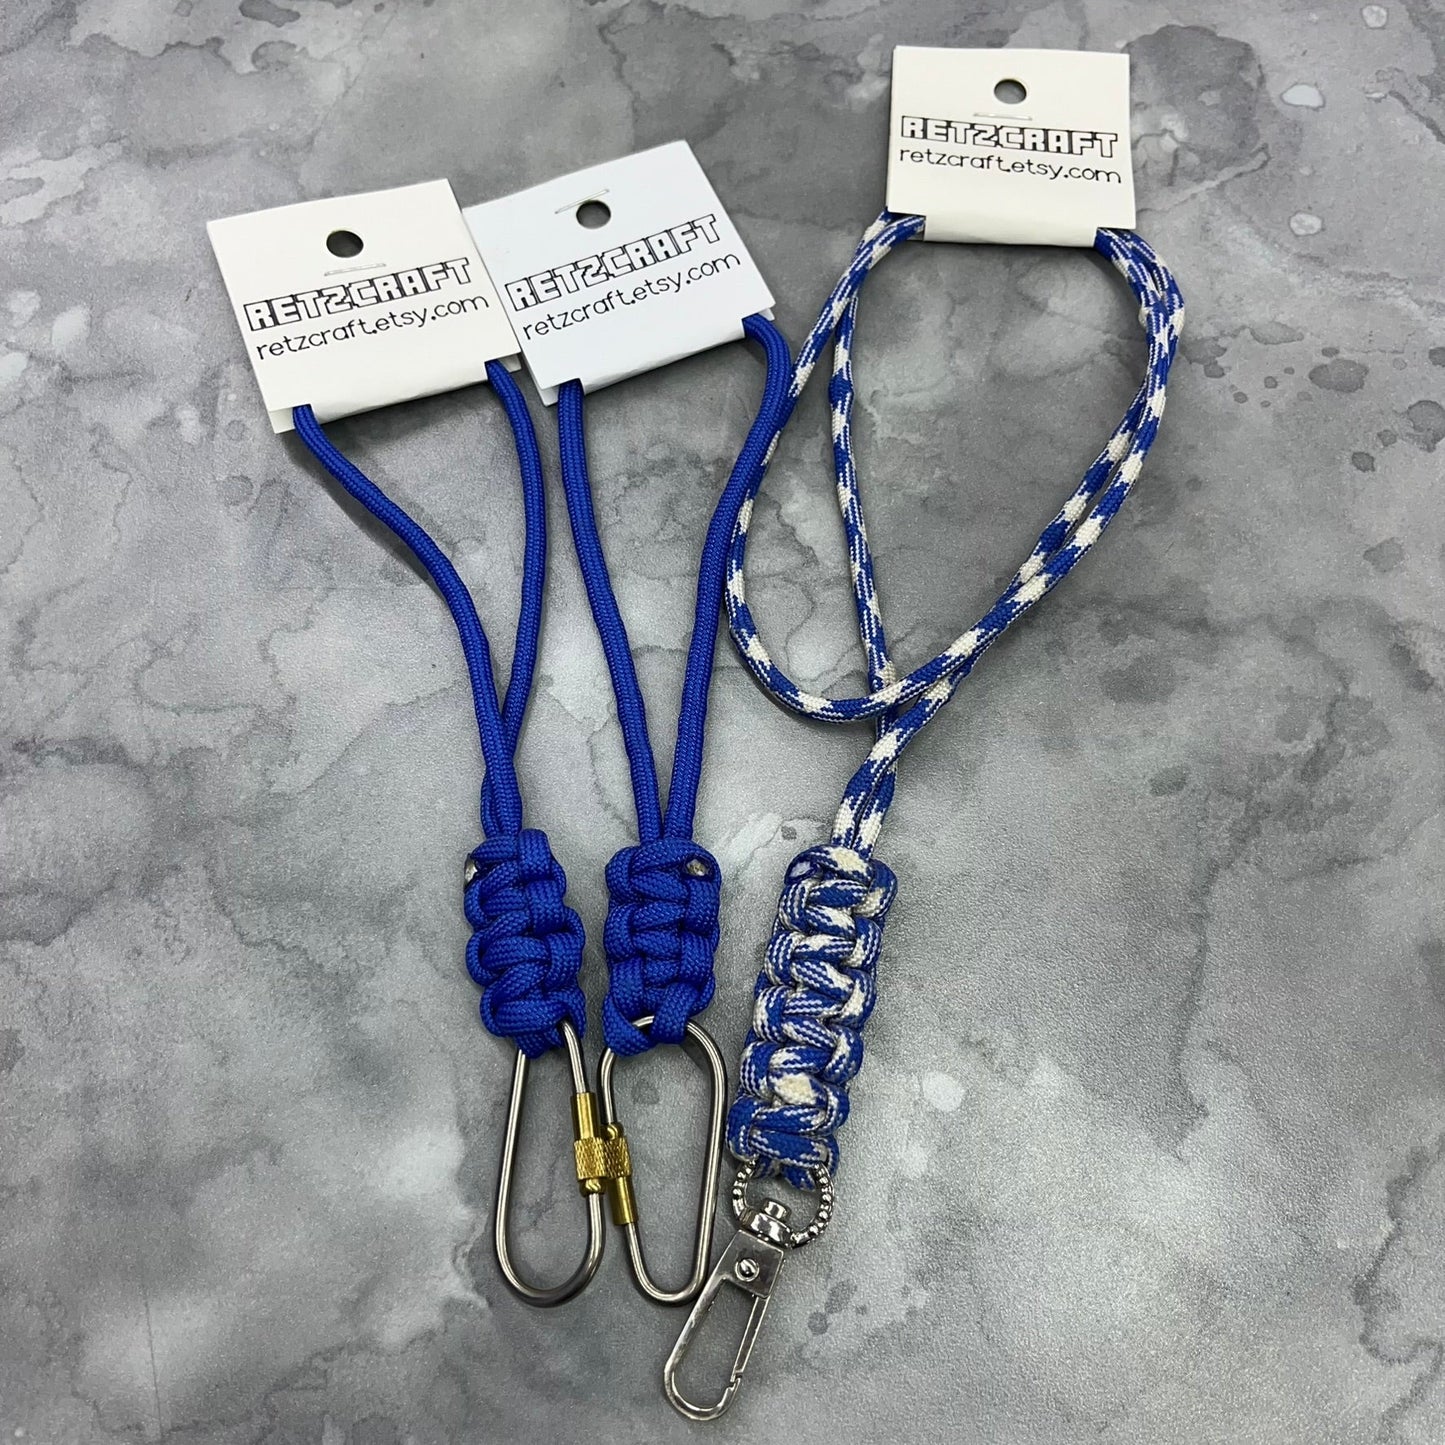 Thin Blue Line Keychains & Lanyards - Thin Blue Line Fundraiser for Bob Shock - Legacy Images - 